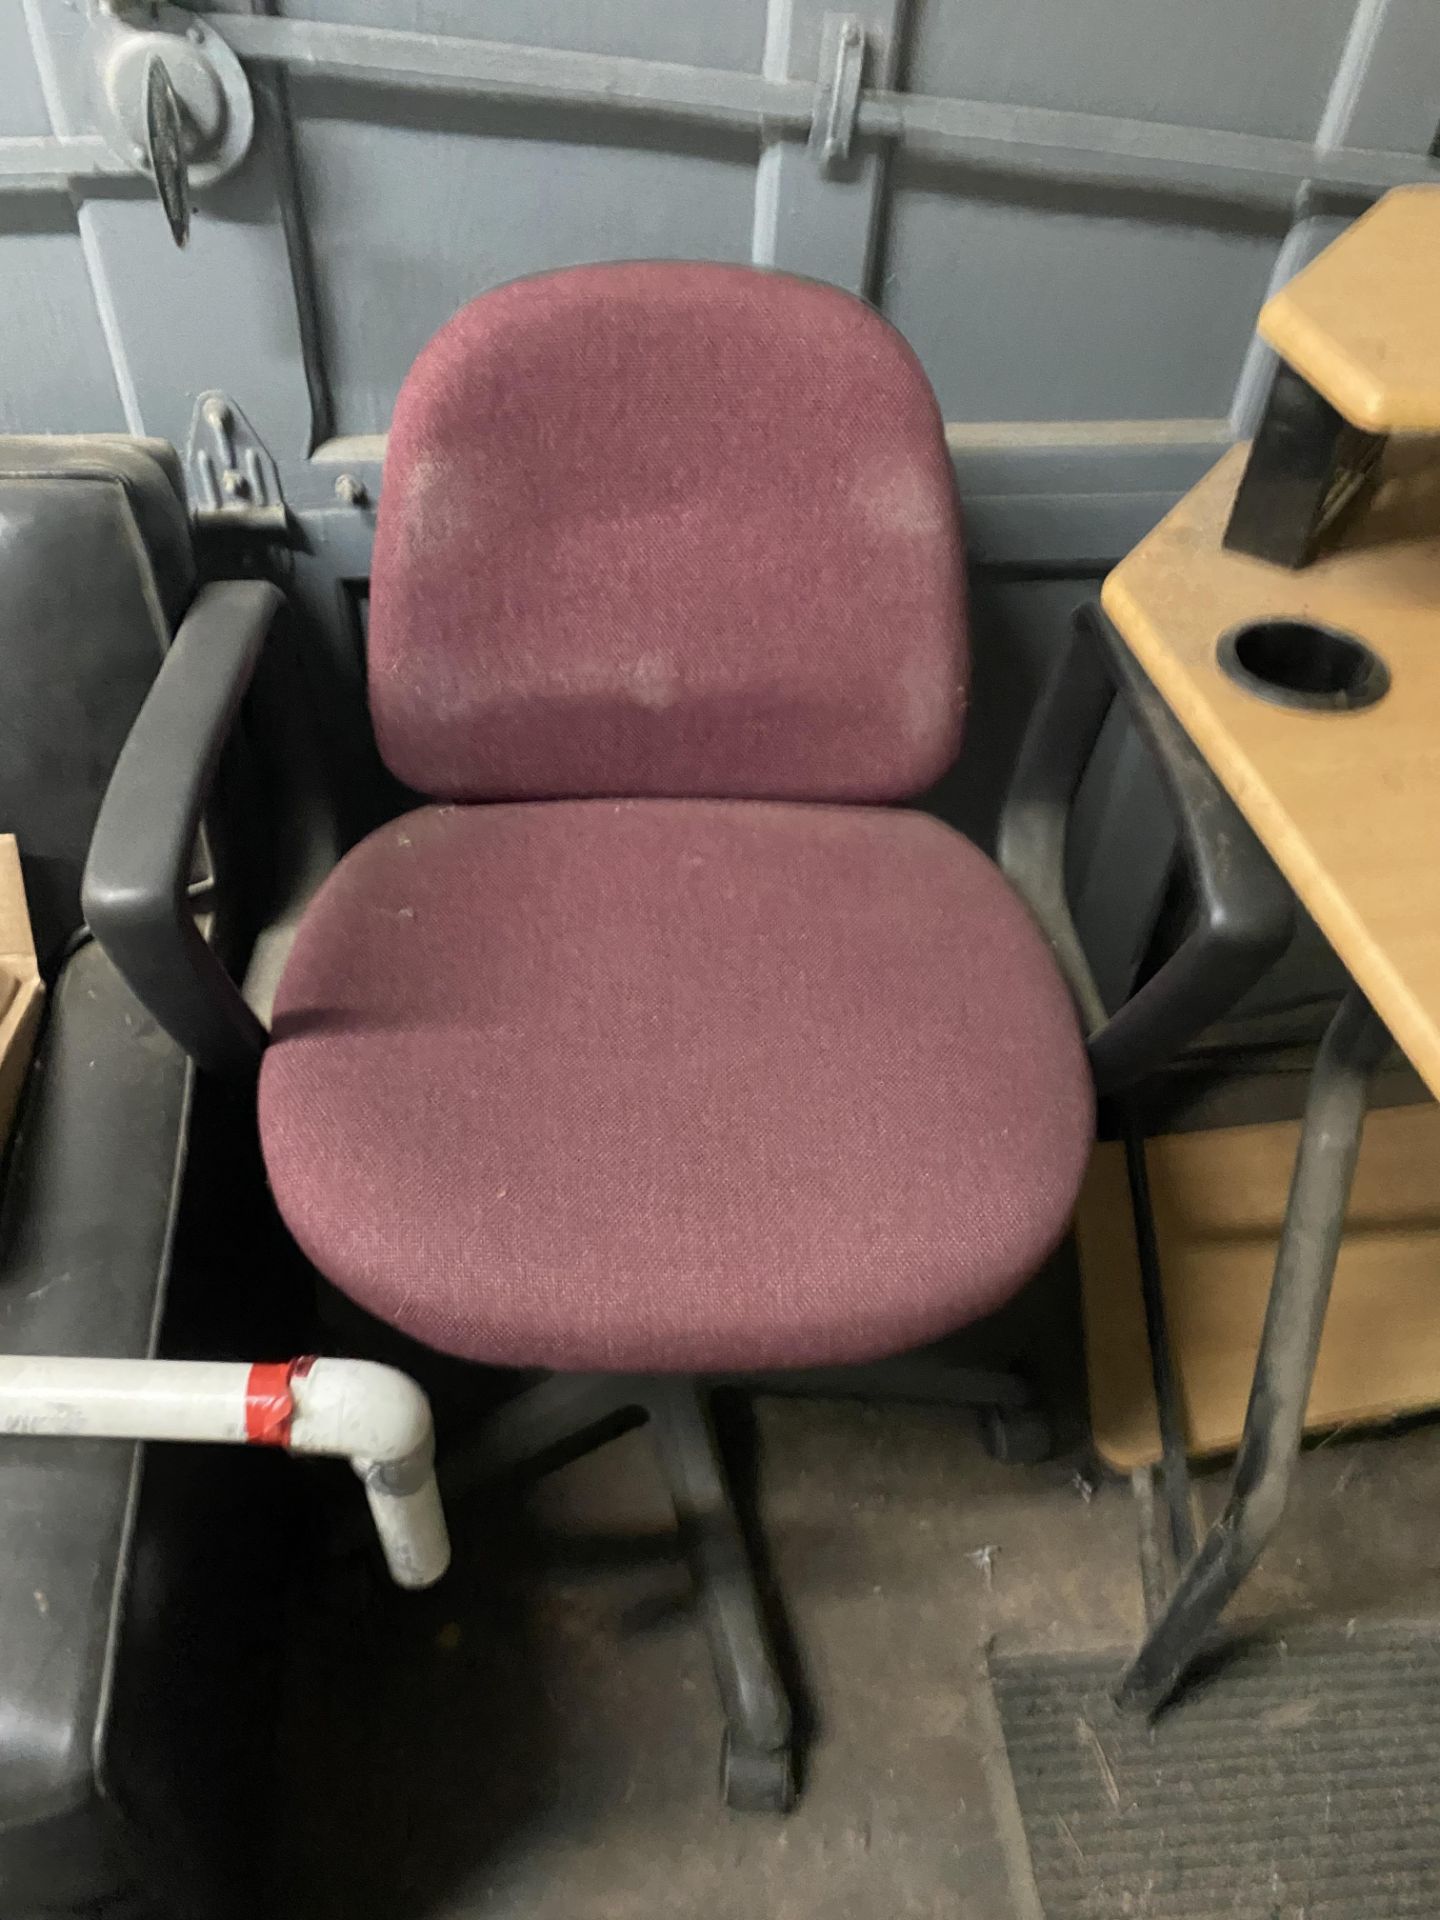 (Lot) 10 Asst. Chairs, c/o: Folding, Office Chairs In Warehouse - Image 5 of 5